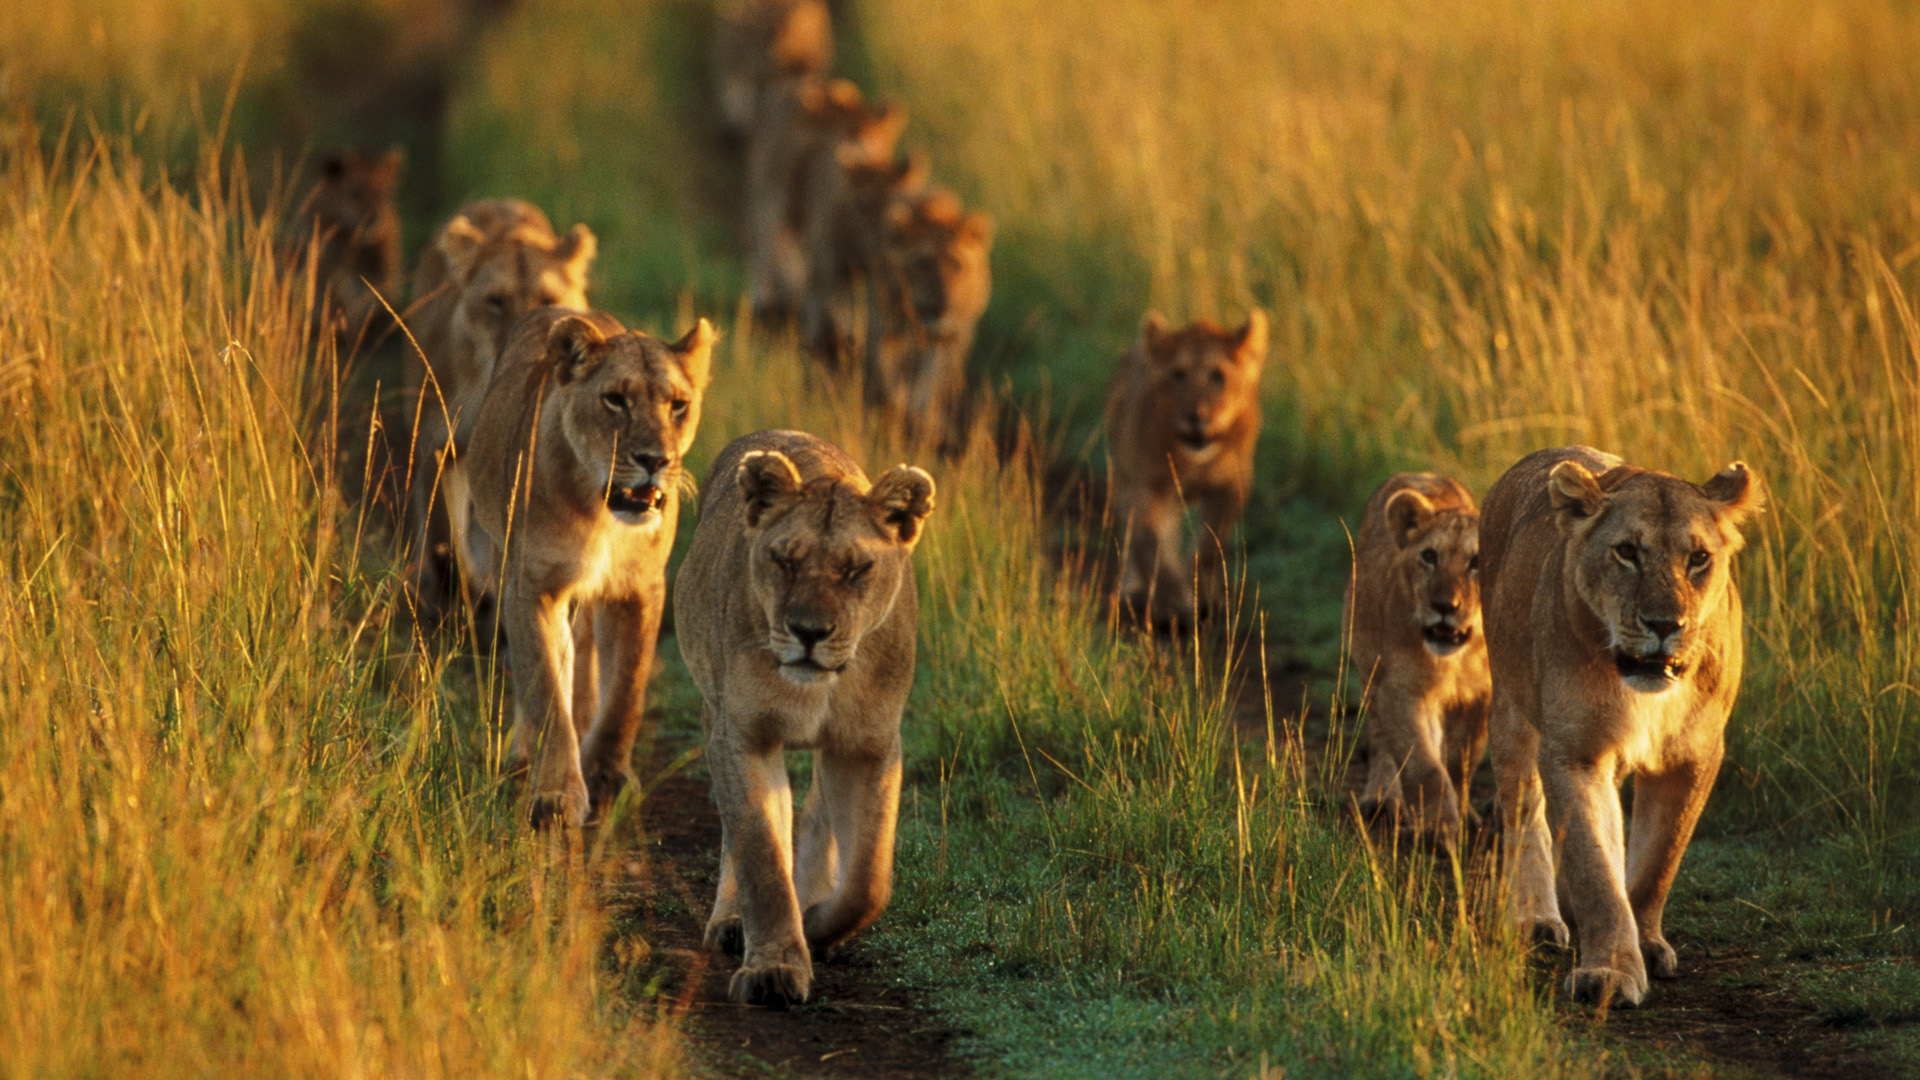 Animals Illuminated by Sunset (Photo Gallery) | Lions, Animal and ...